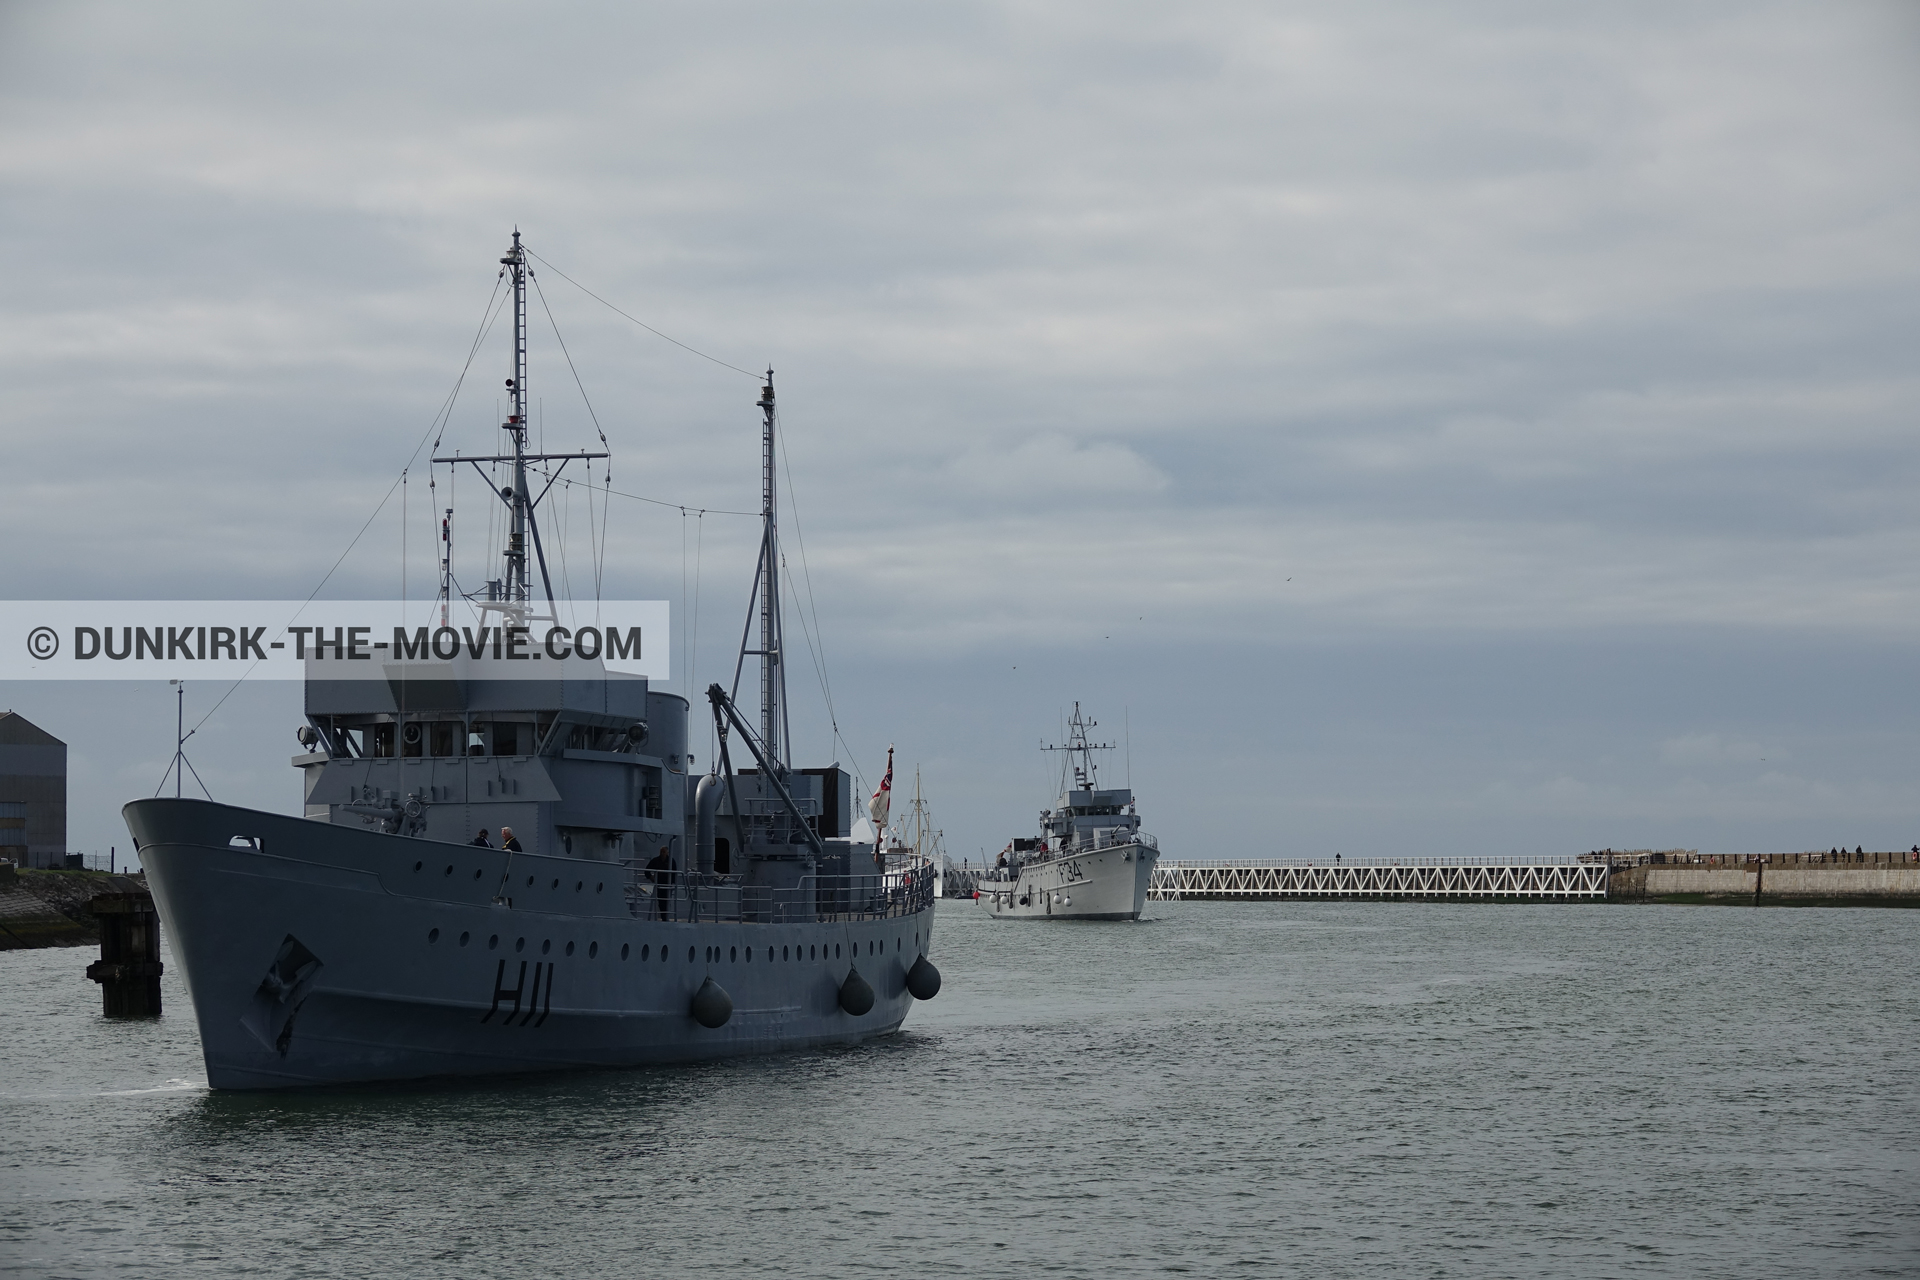 Picture with cloudy sky, F34 - Hr.Ms. Sittard, H11 - MLV Castor, EST pier, calm sea,  from behind the scene of the Dunkirk movie by Nolan